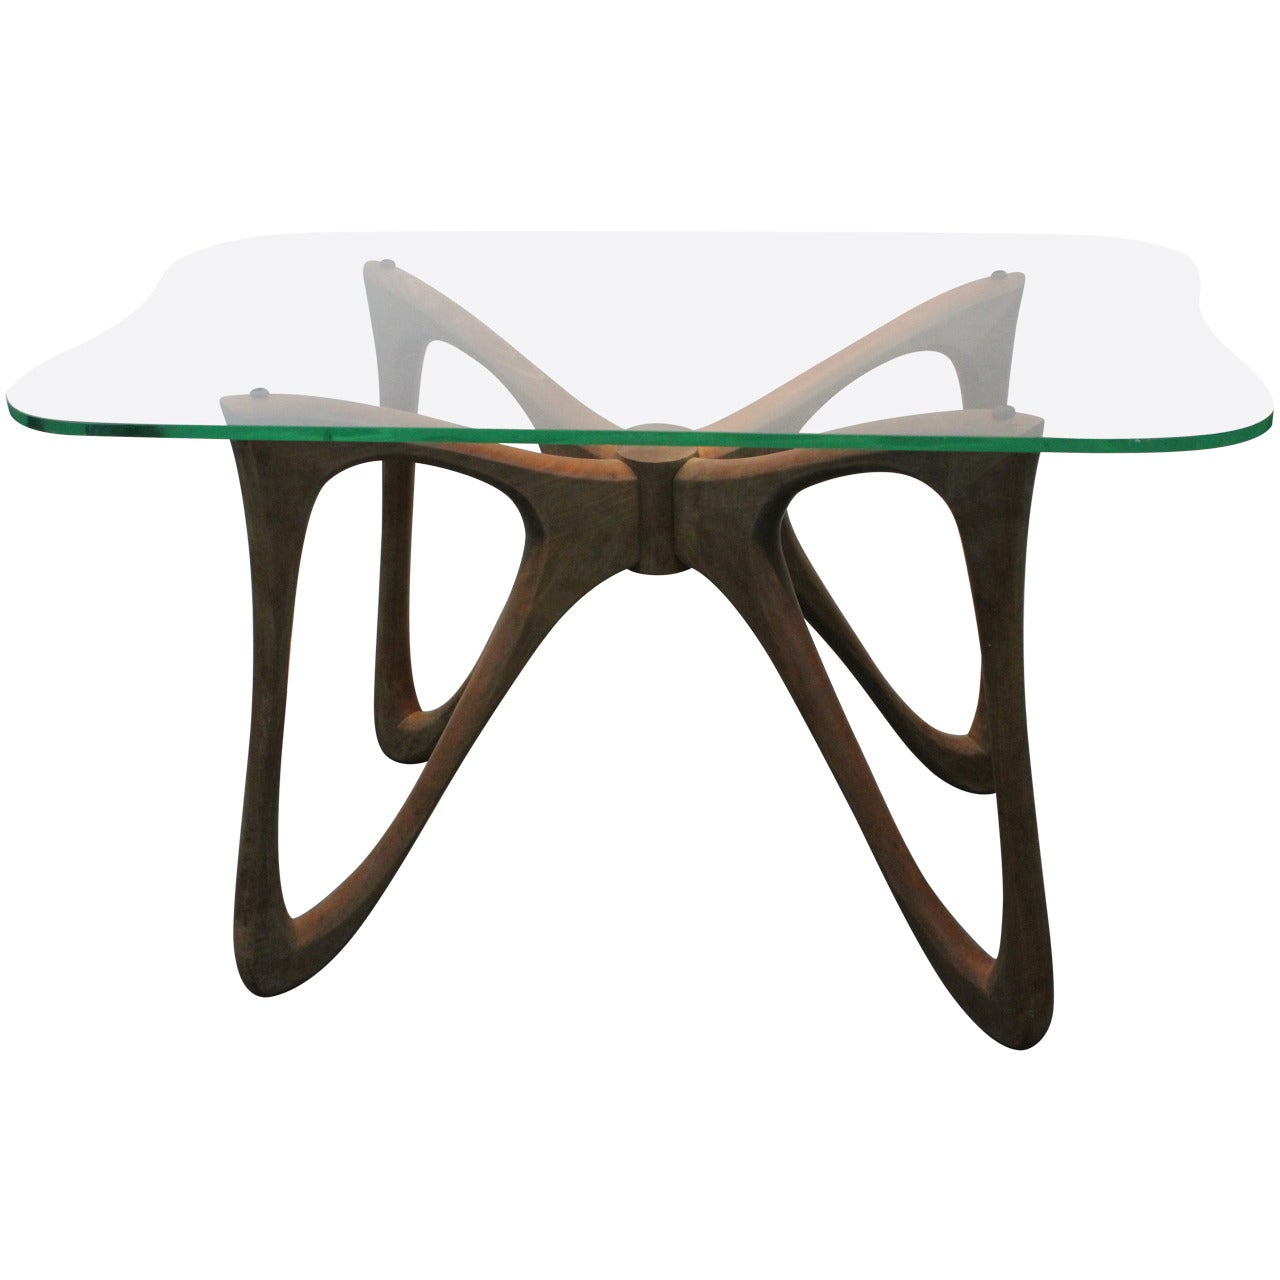 Biomorphic Mid-Century Modernist Sculptural Side Table For Sale